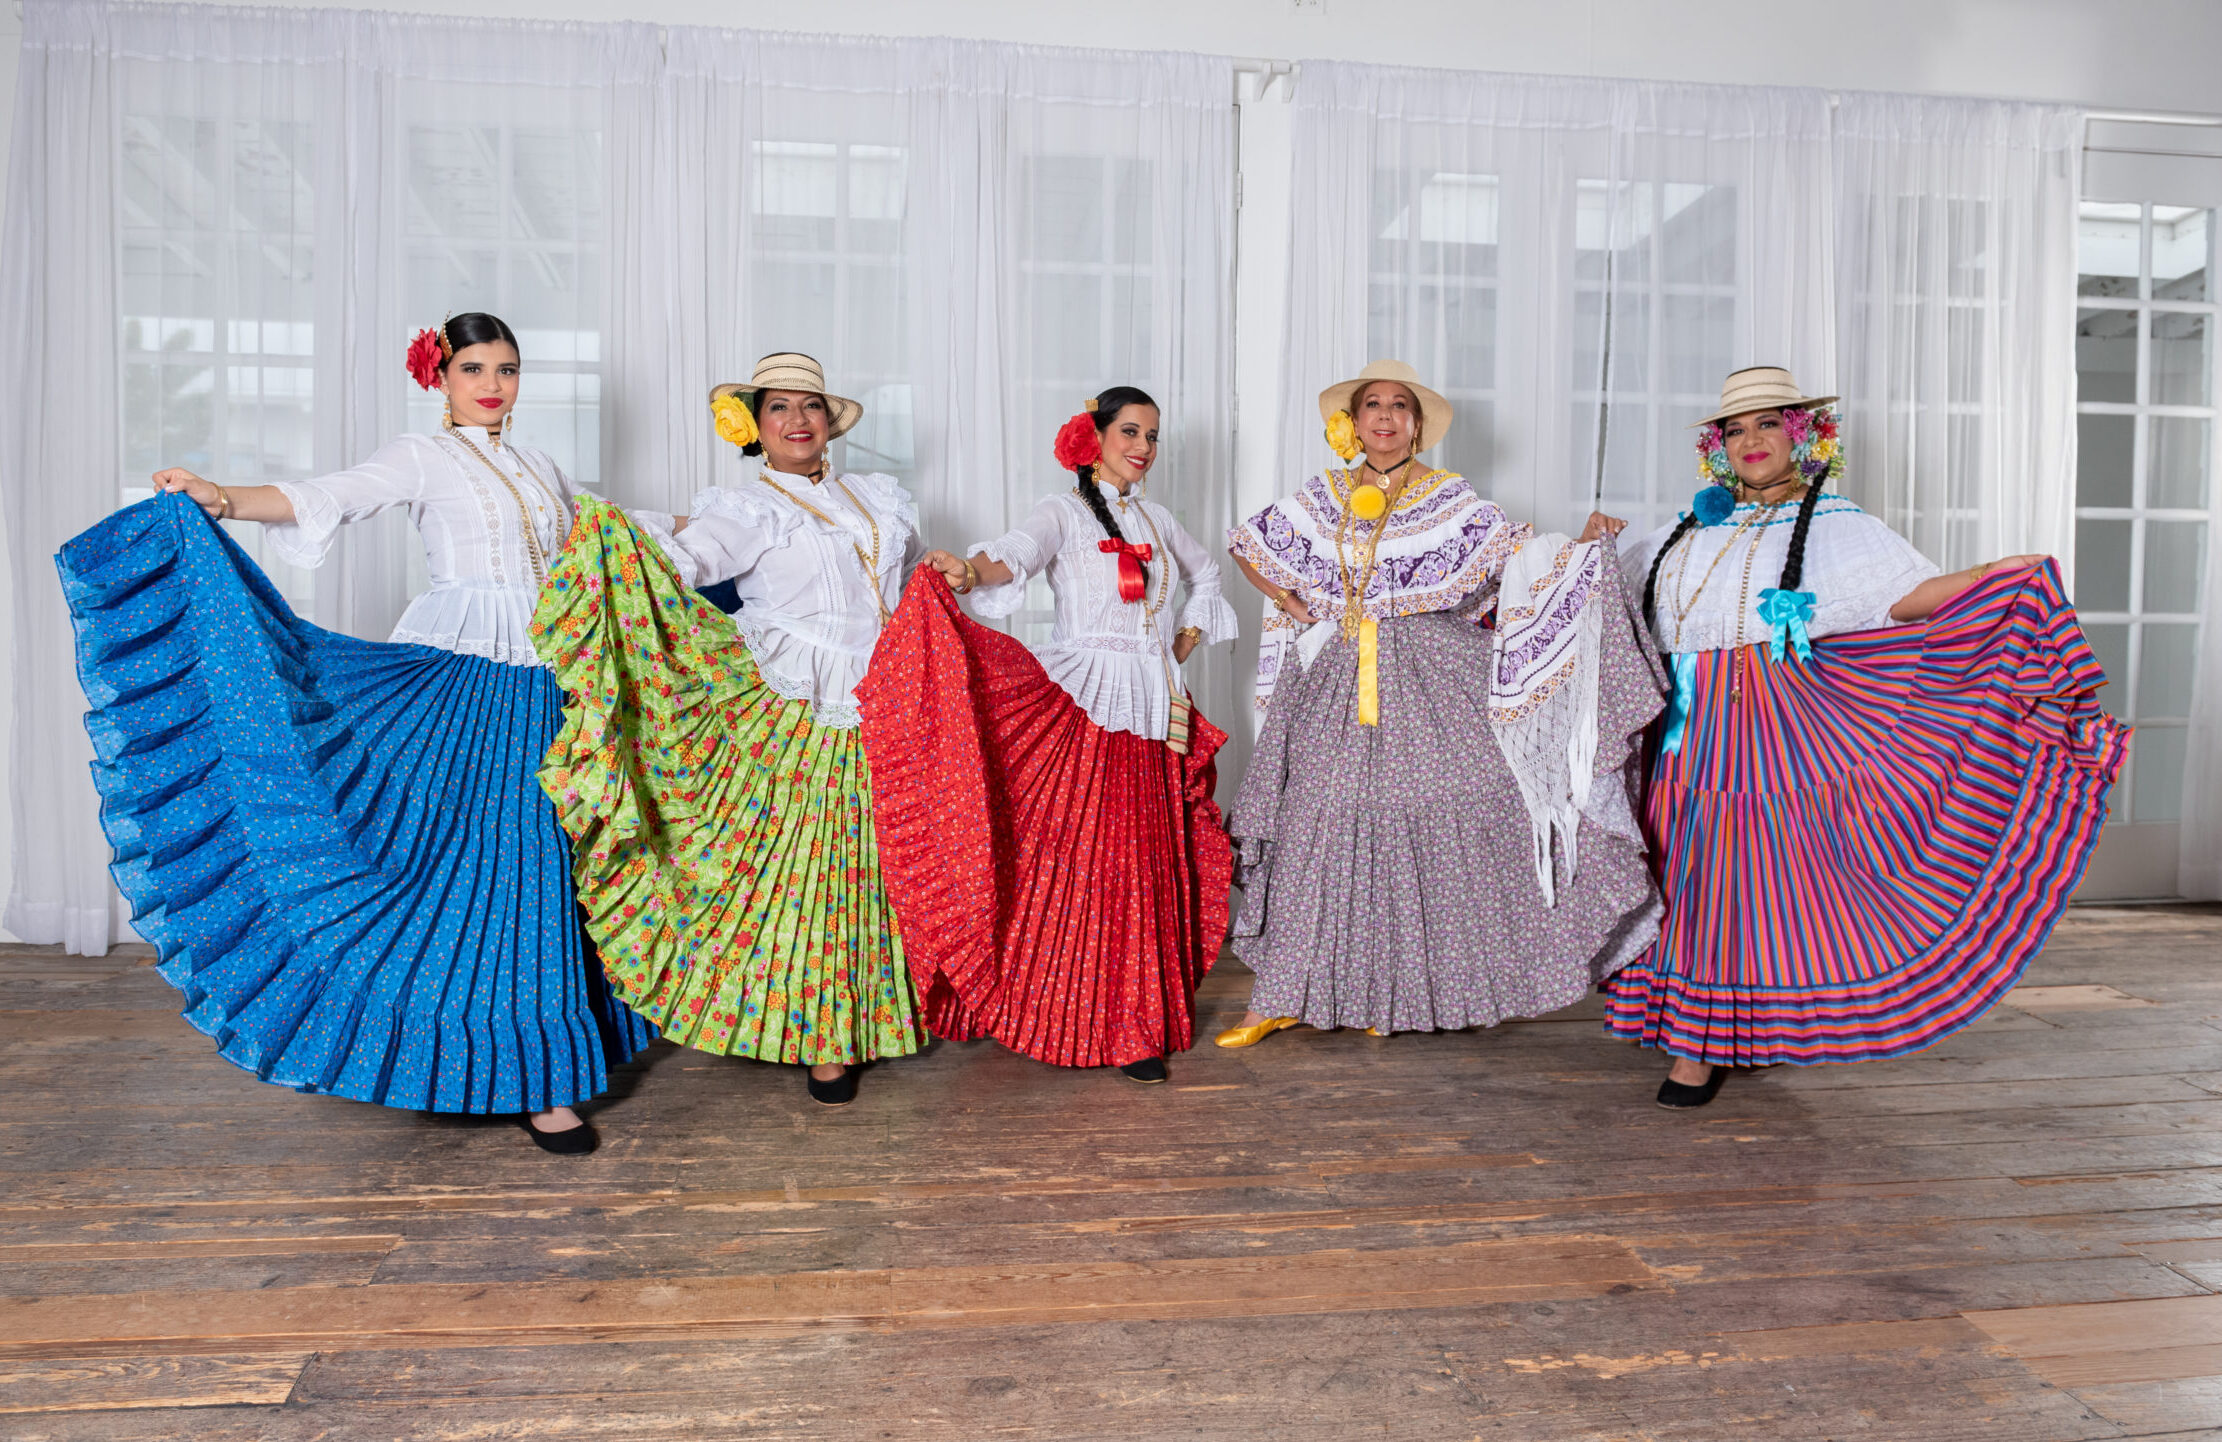 Five women wearing long colorful skirts and different kinds of embroidered and lace tops pose for a photo with their skirts fanned out.